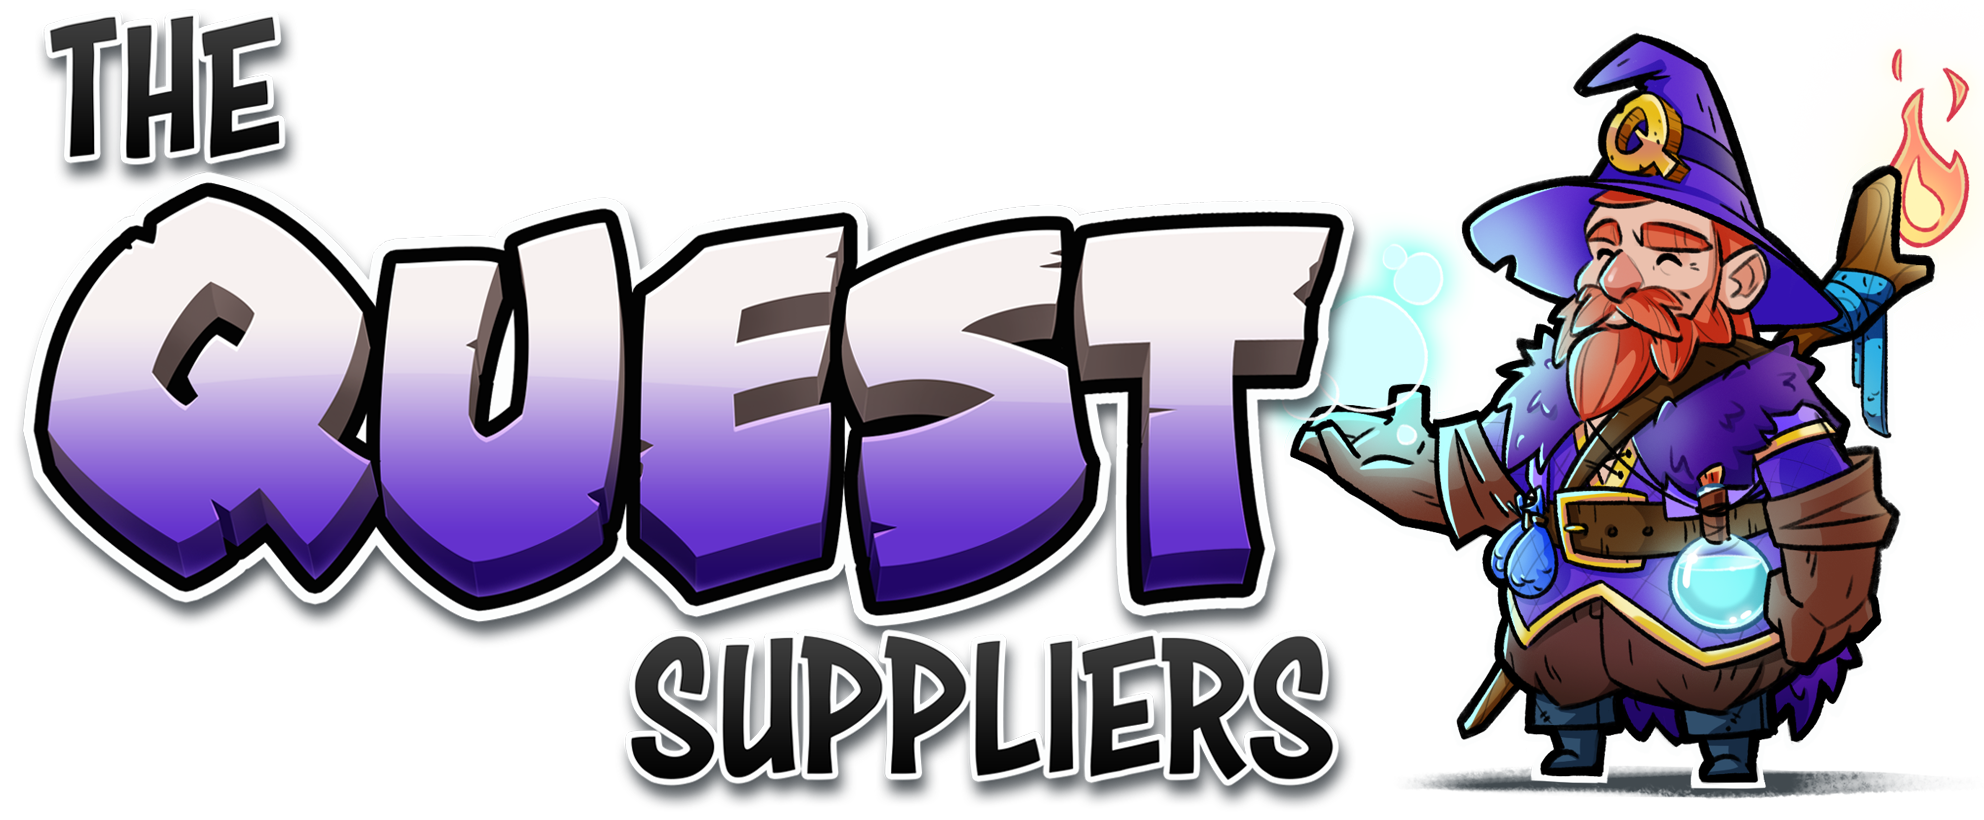 The Quest Suppliers